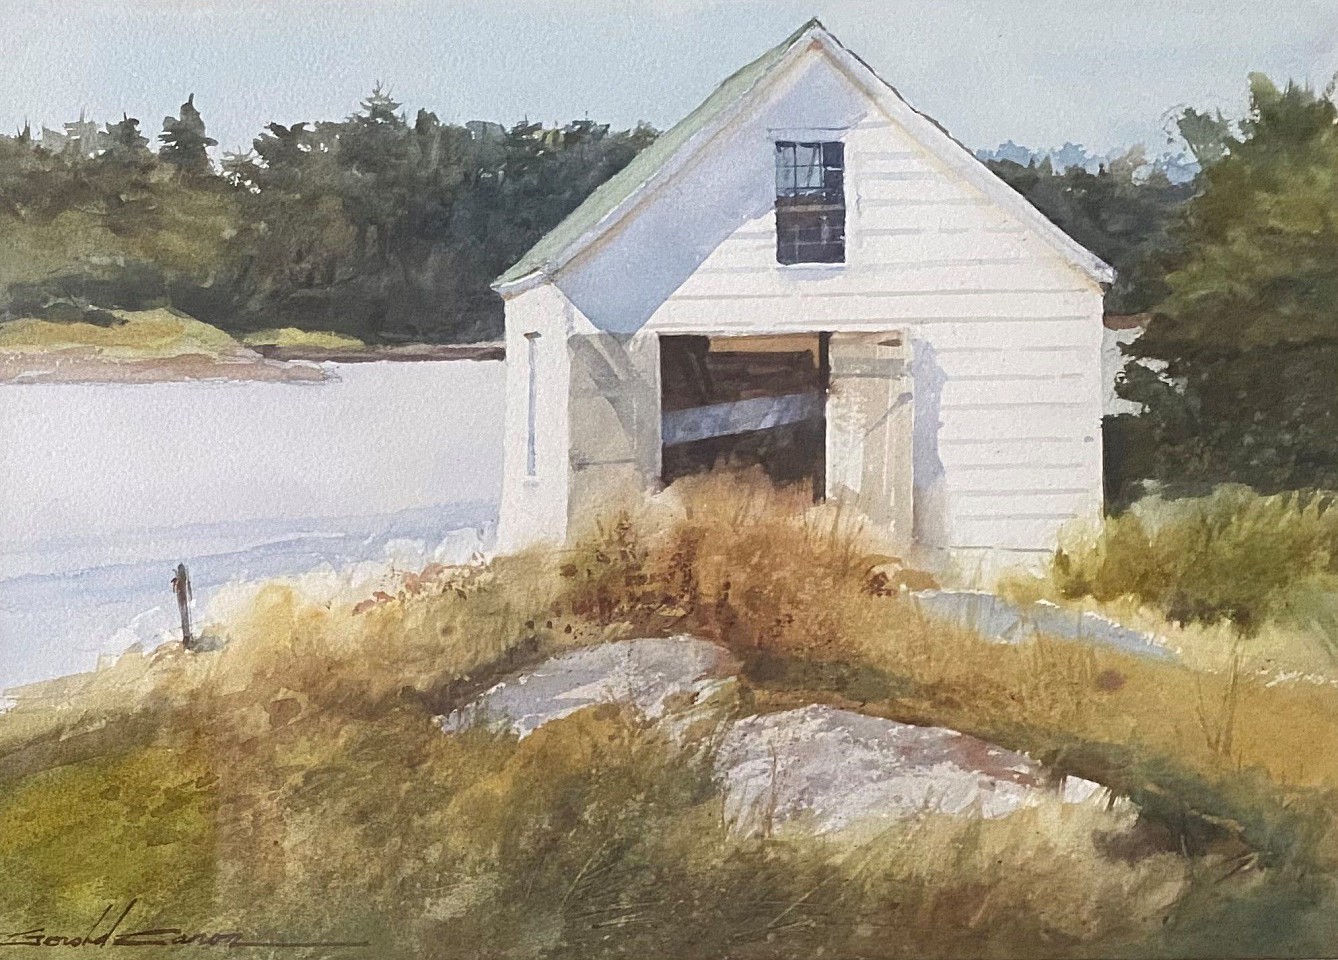 Jerry Caron, Saturday Morning
watercolor on paper, 10"" x 14""
NC 0223.07
$950